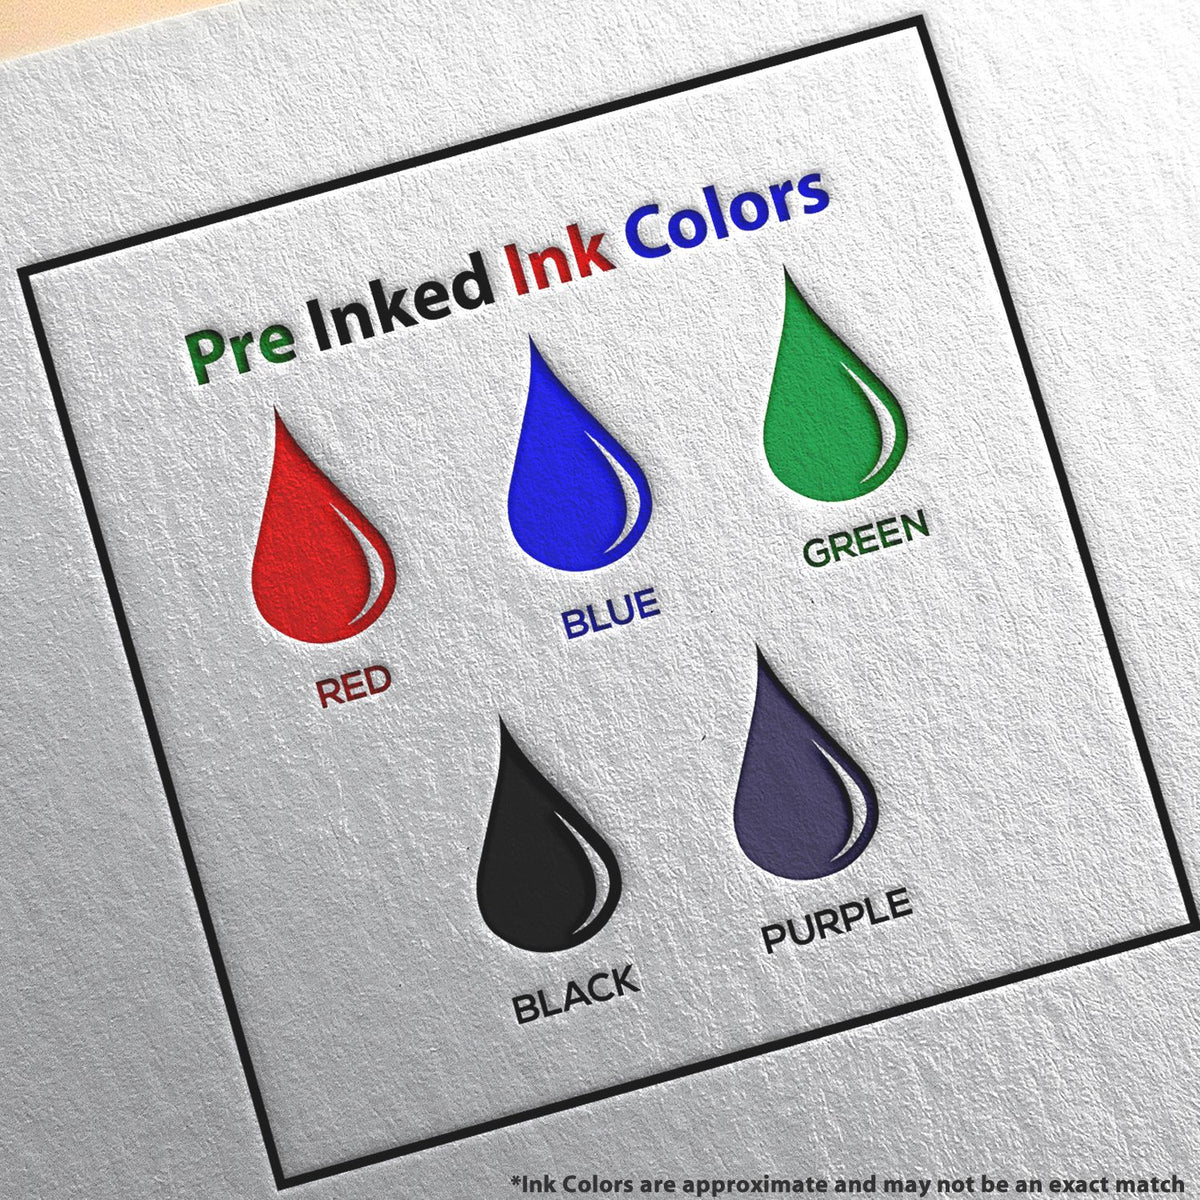 A picture showing the different ink colors or hues available for the MaxLight Premium Pre-Inked Alabama State Seal Notarial Stamp product.